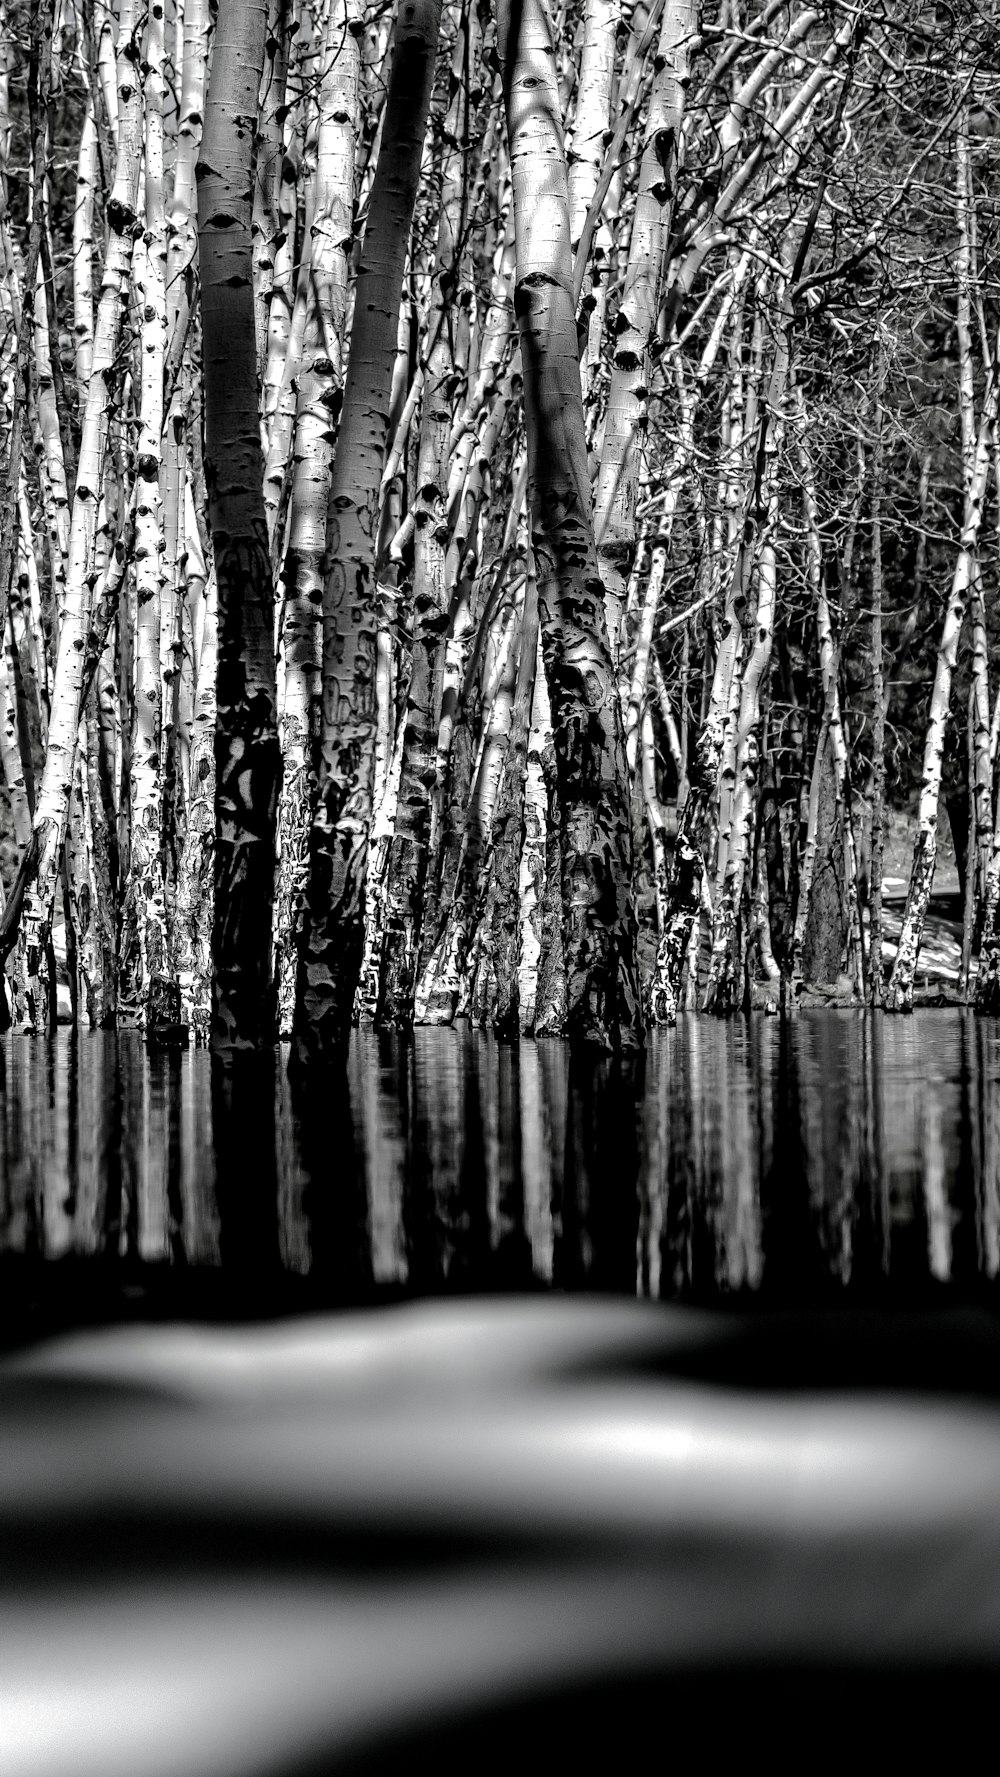 grayscale photography of body of water near trees